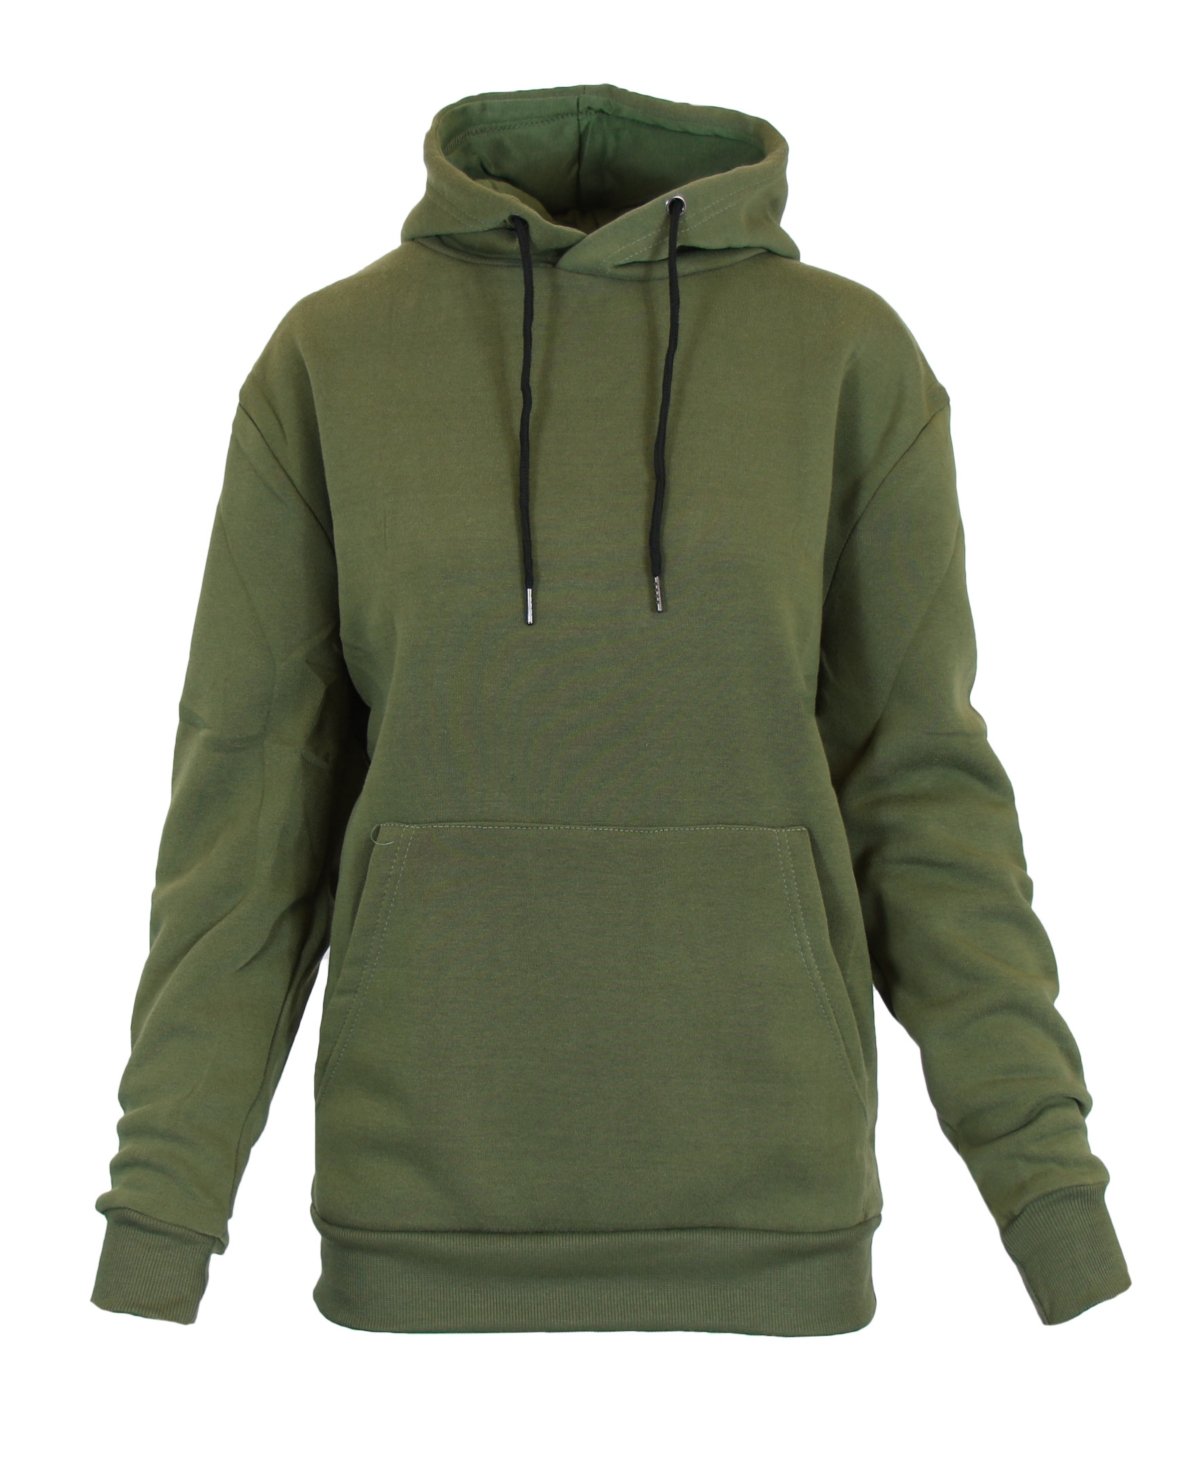 Galaxy By Harvic Women's Heavyweight Loose Fit Fleece Lined Pullover Hoodie In Olive